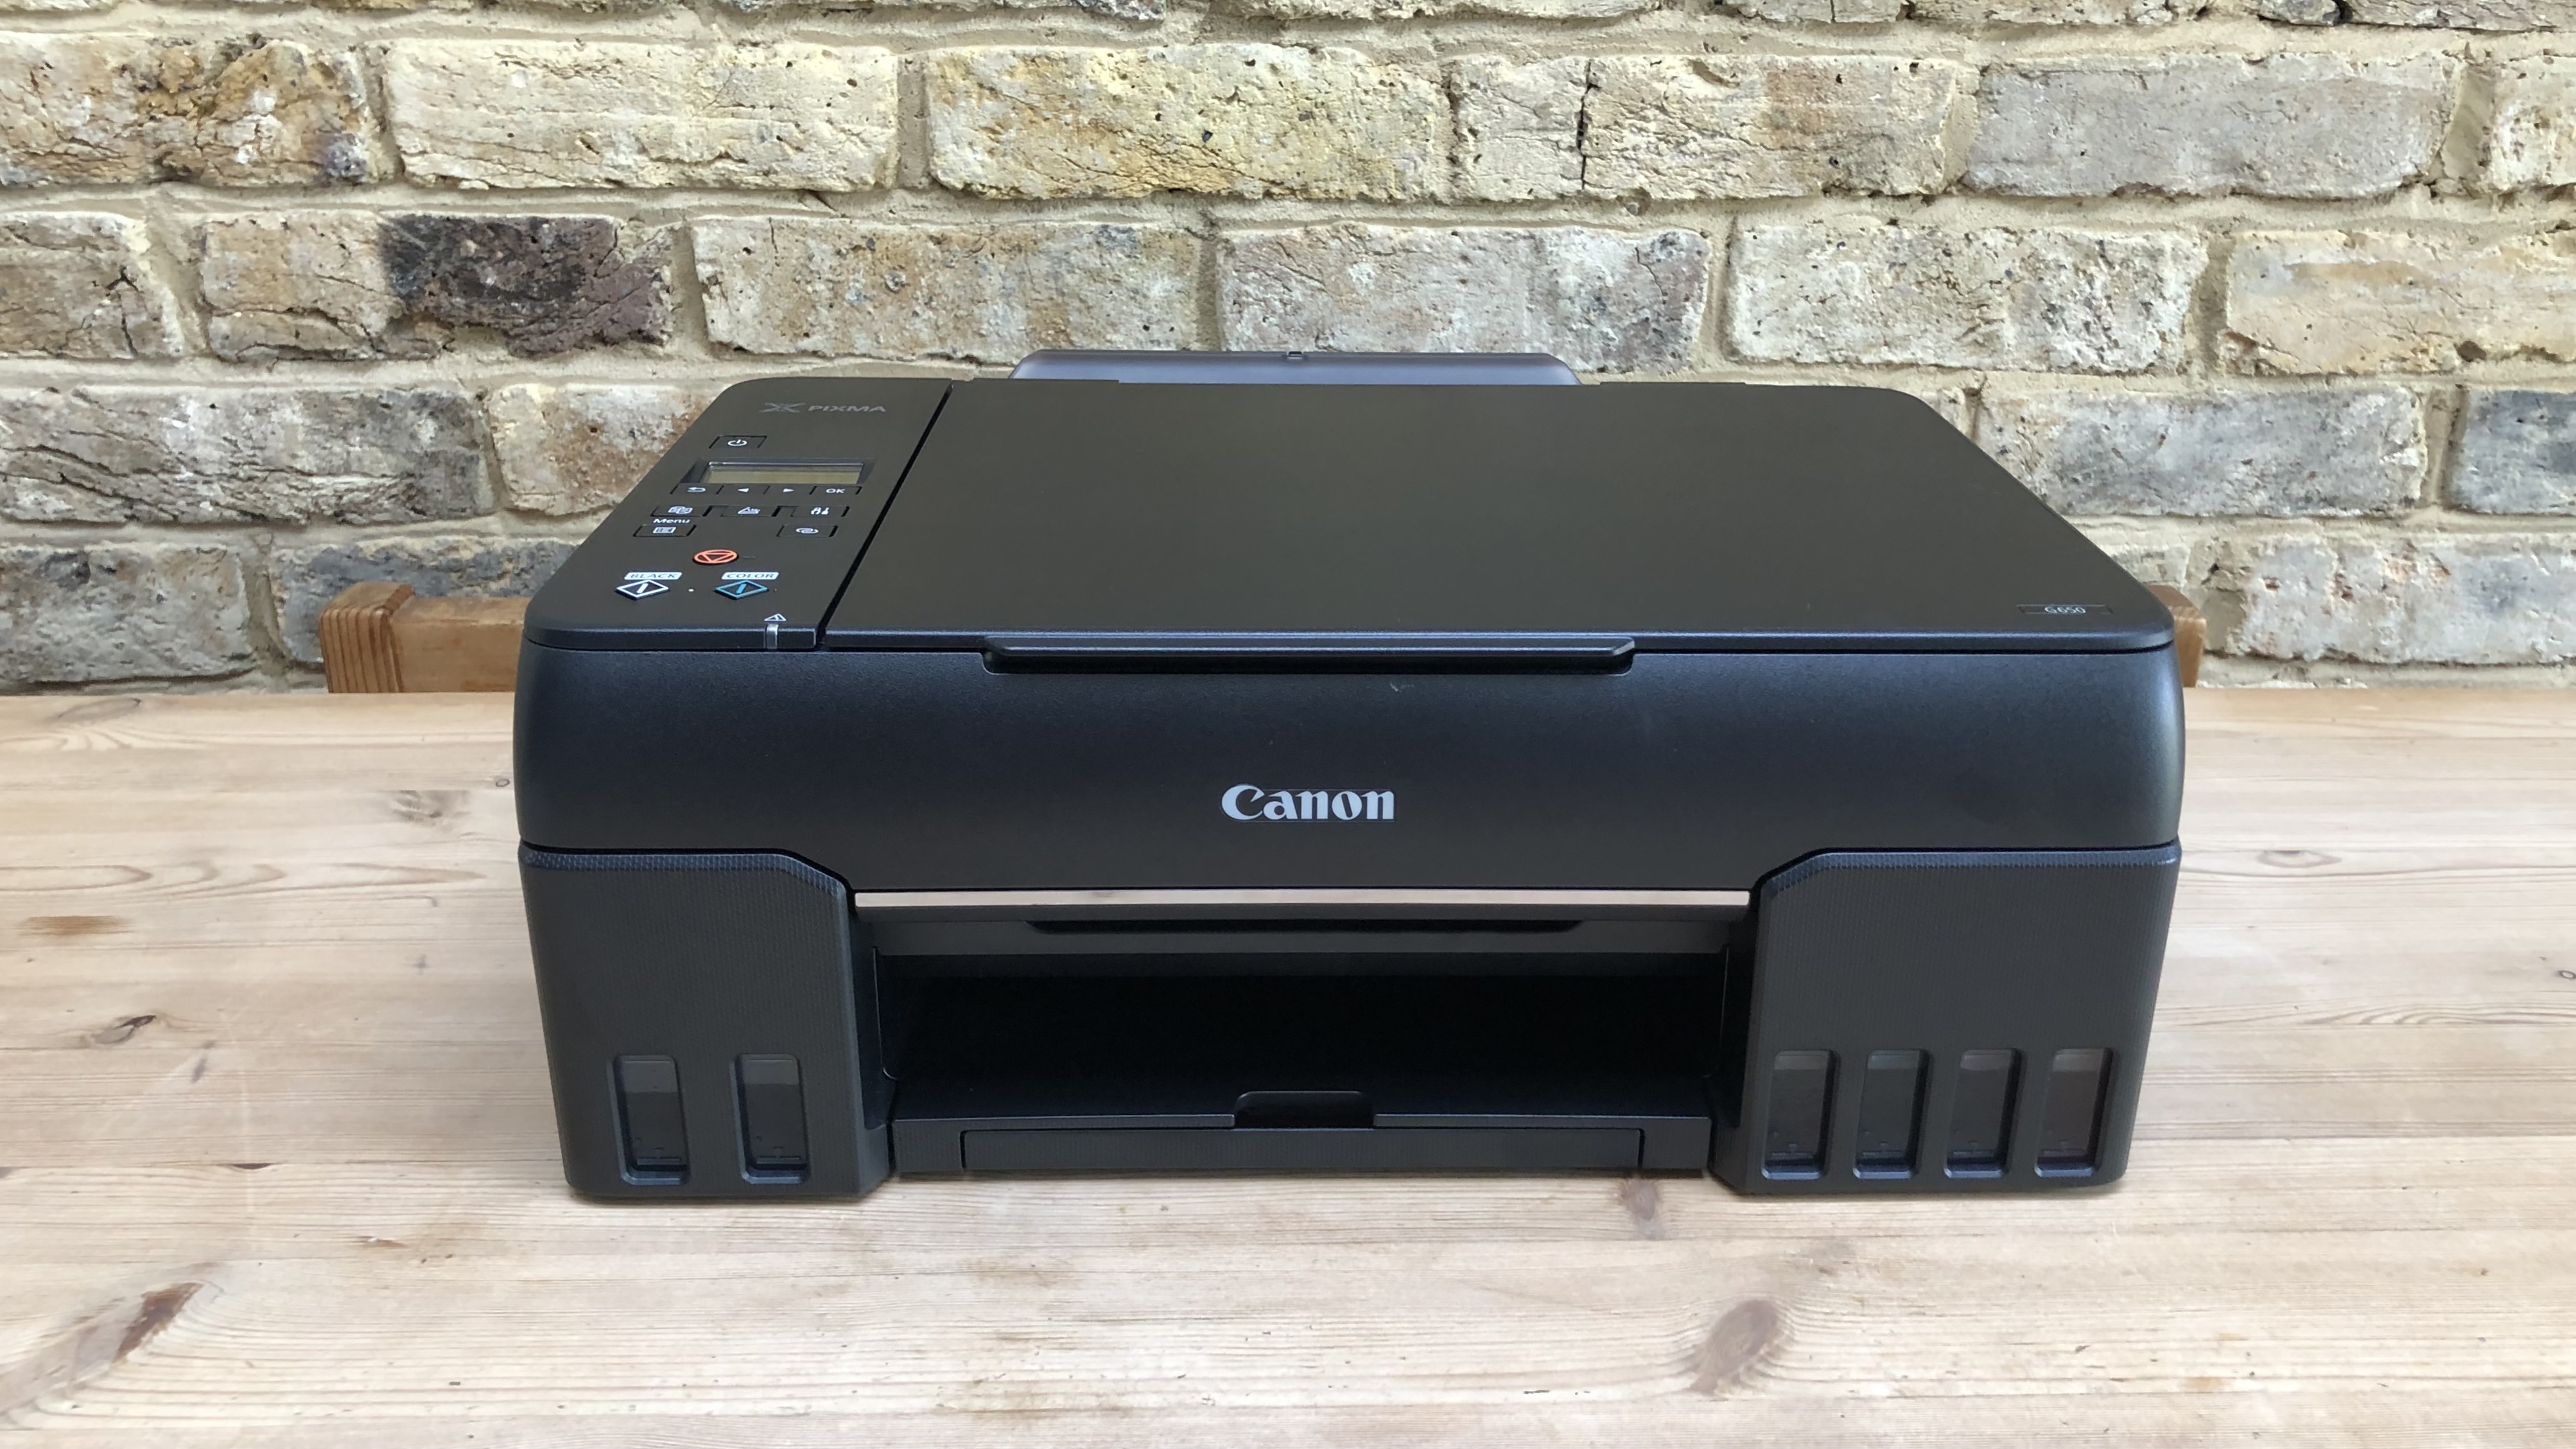 Rear Feed Versus Front Loading Printers